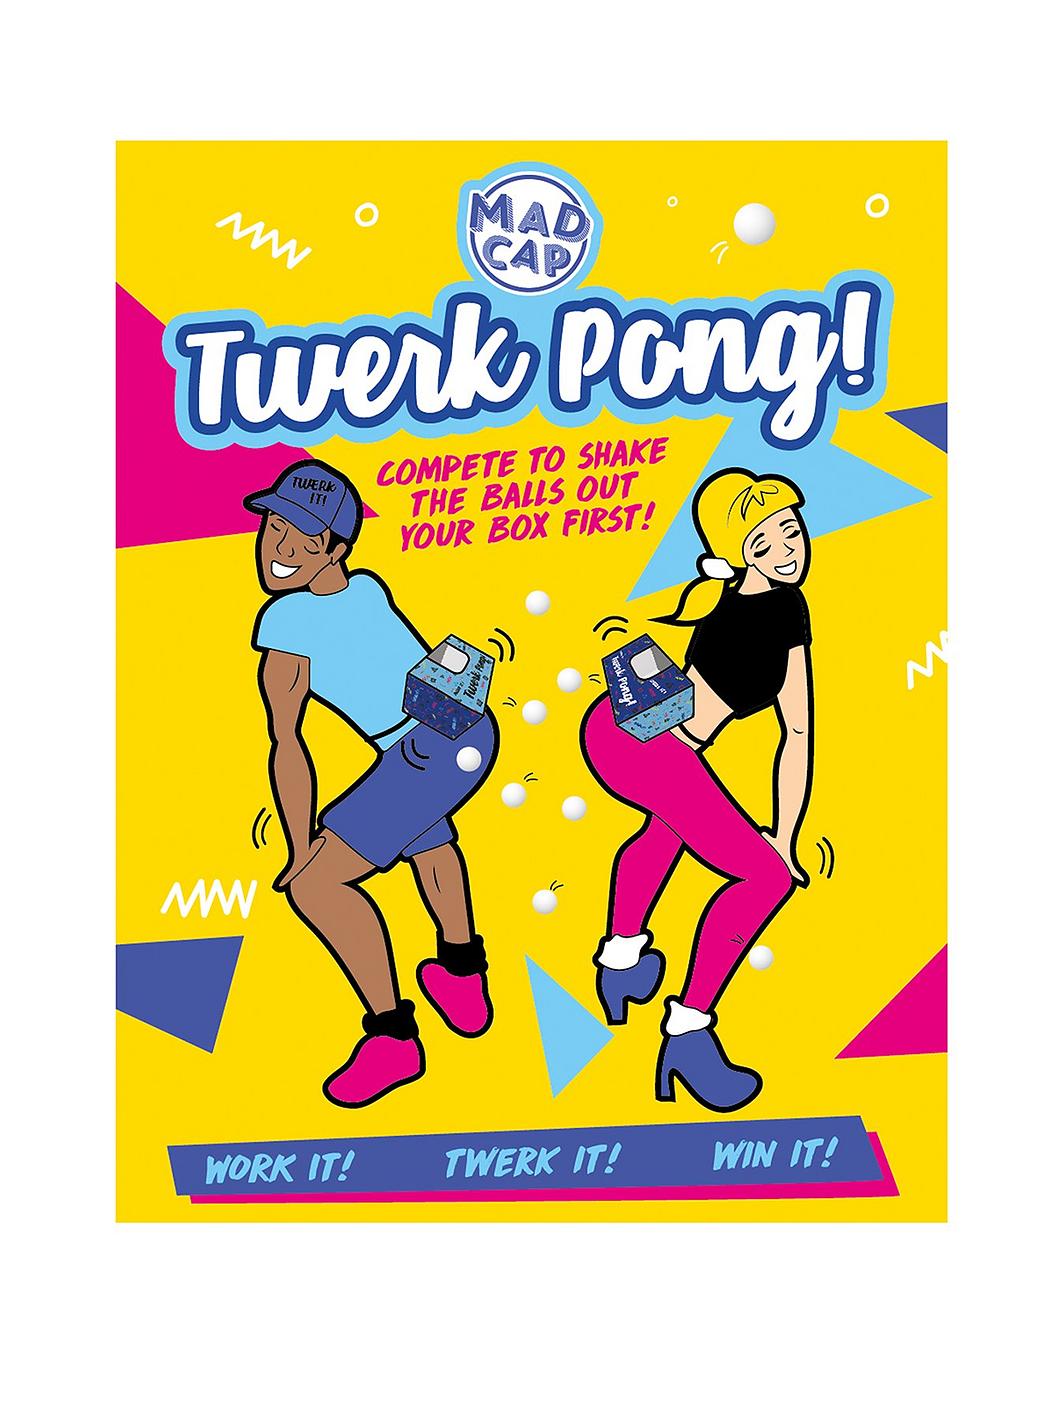 What to get your friend formonstrously Christmas - A Twerk Pong Set